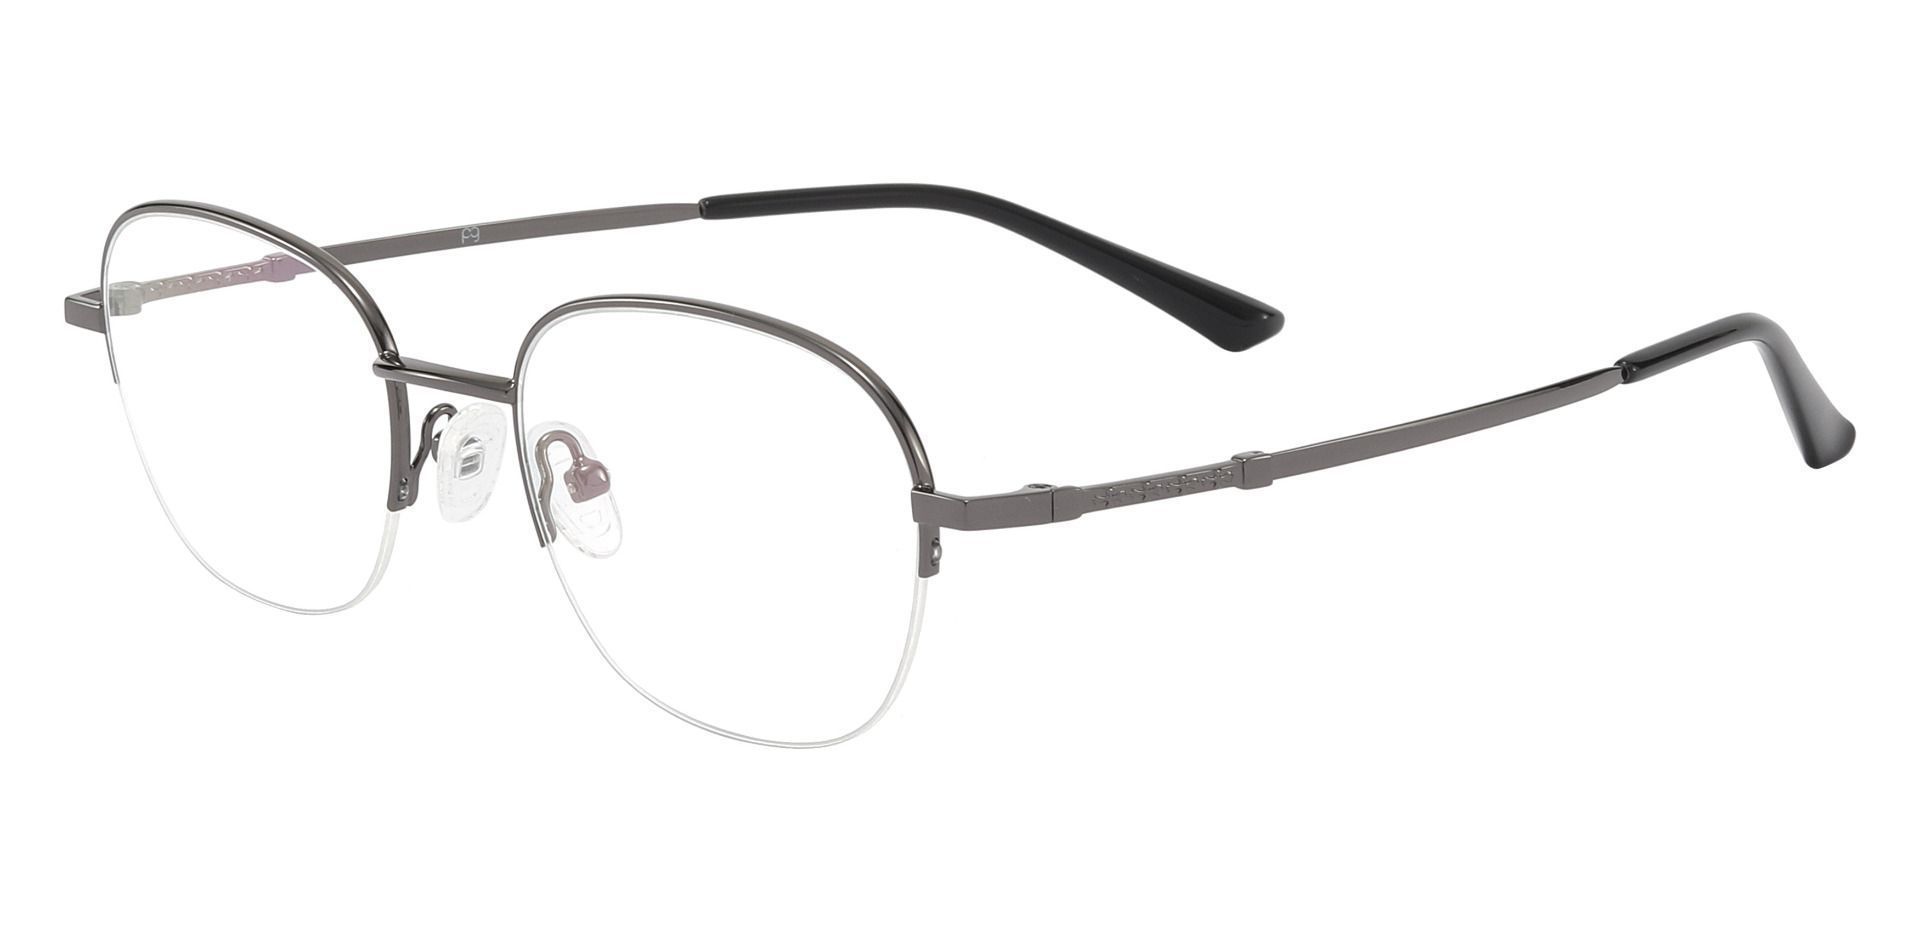 Rochester Oval Lined Bifocal Glasses - Gray